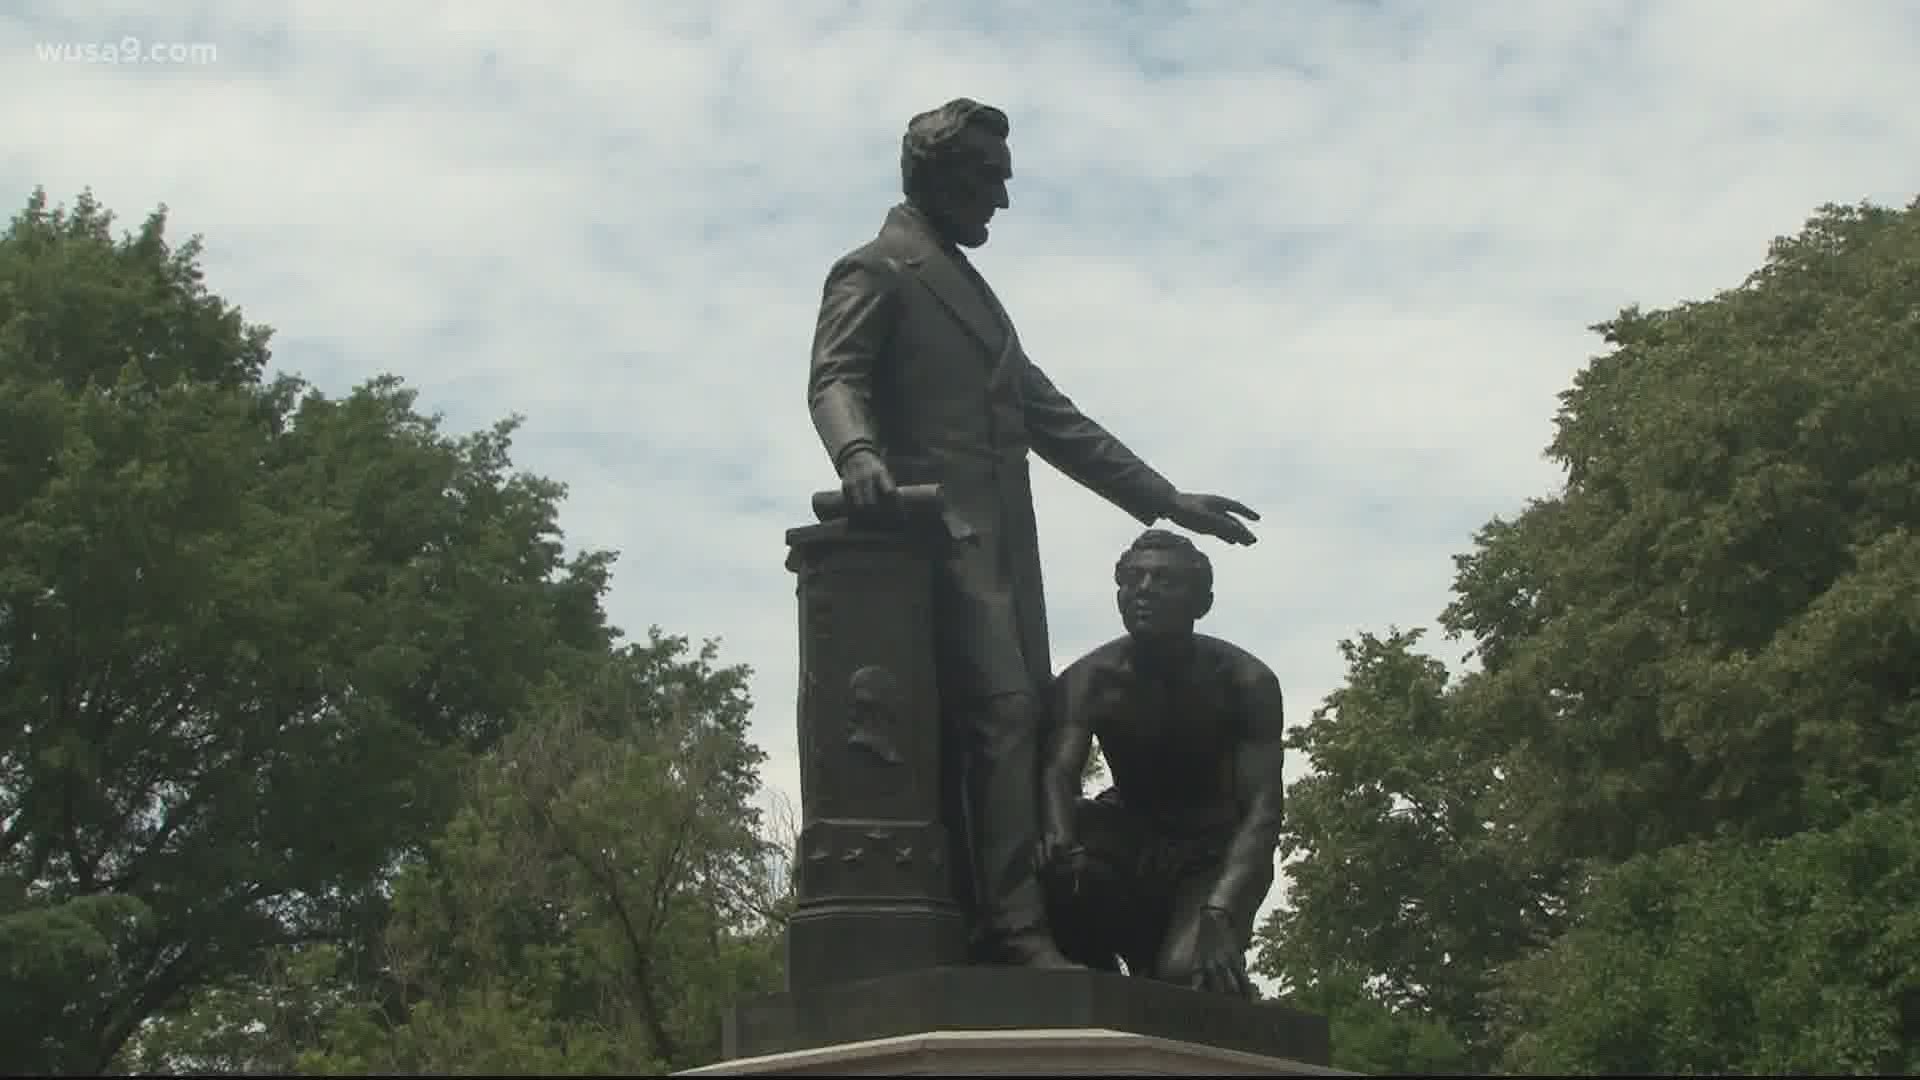 As an online petition makes its rounds, history buffs emerge to speak out against it in hopes of preserving the legacy of freed slaves who funded the statue.